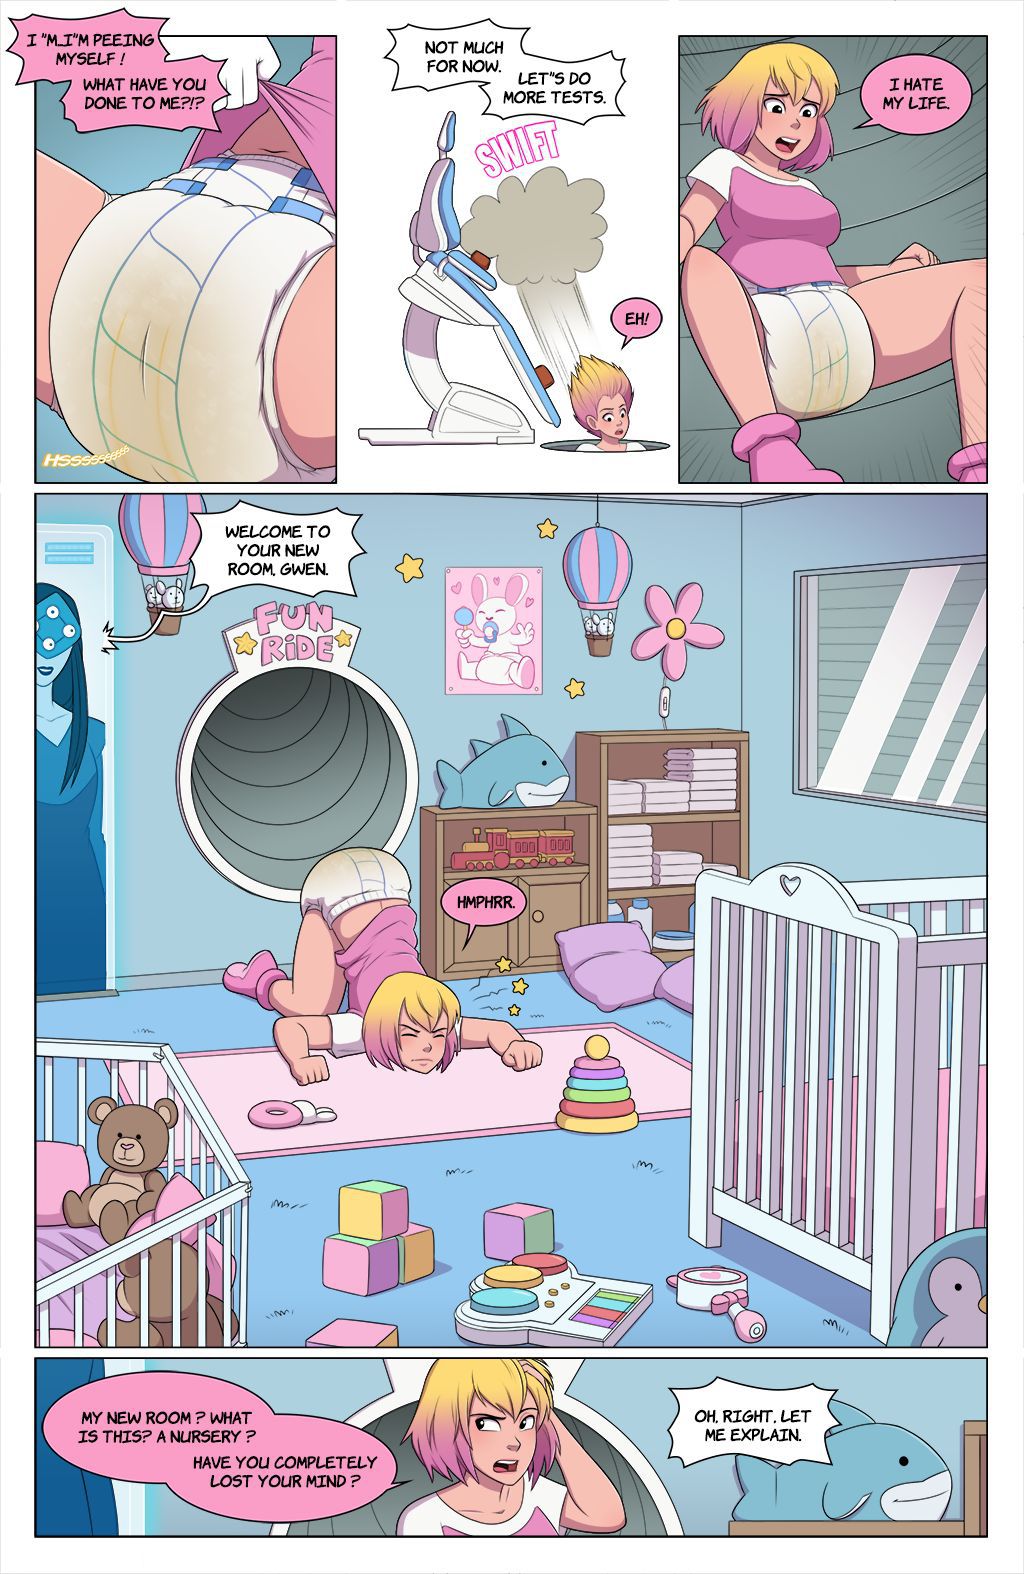 [PieceofSoap] Shits and Giggles (Gwenpool) [Ongoing] 6